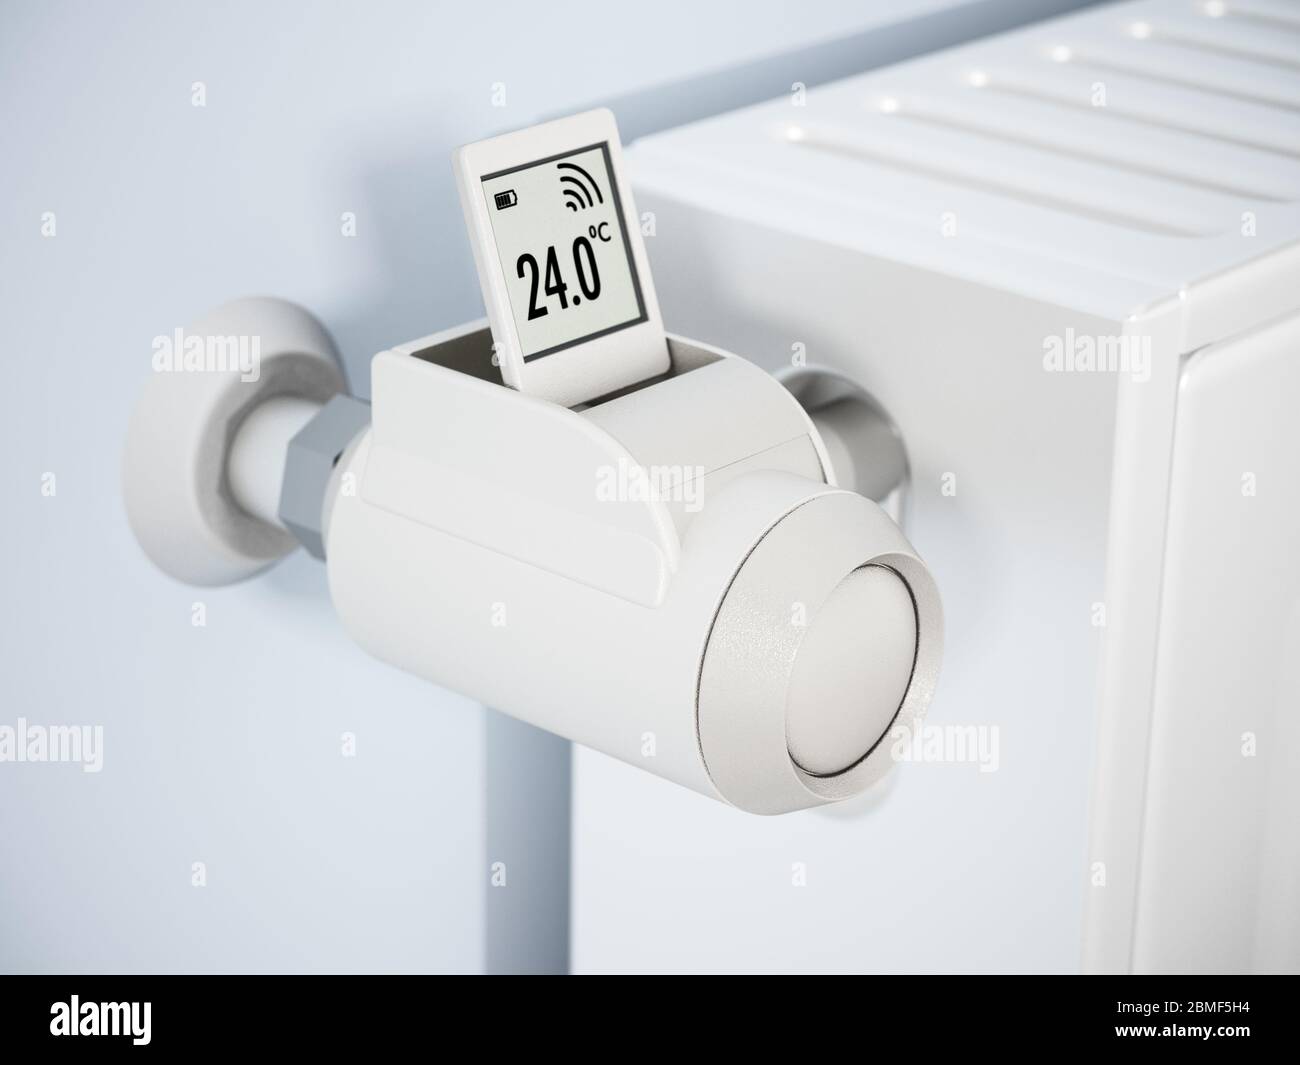 Smart thermostatic radiator valve with LCD screen. 3D illustration. Stock Photo